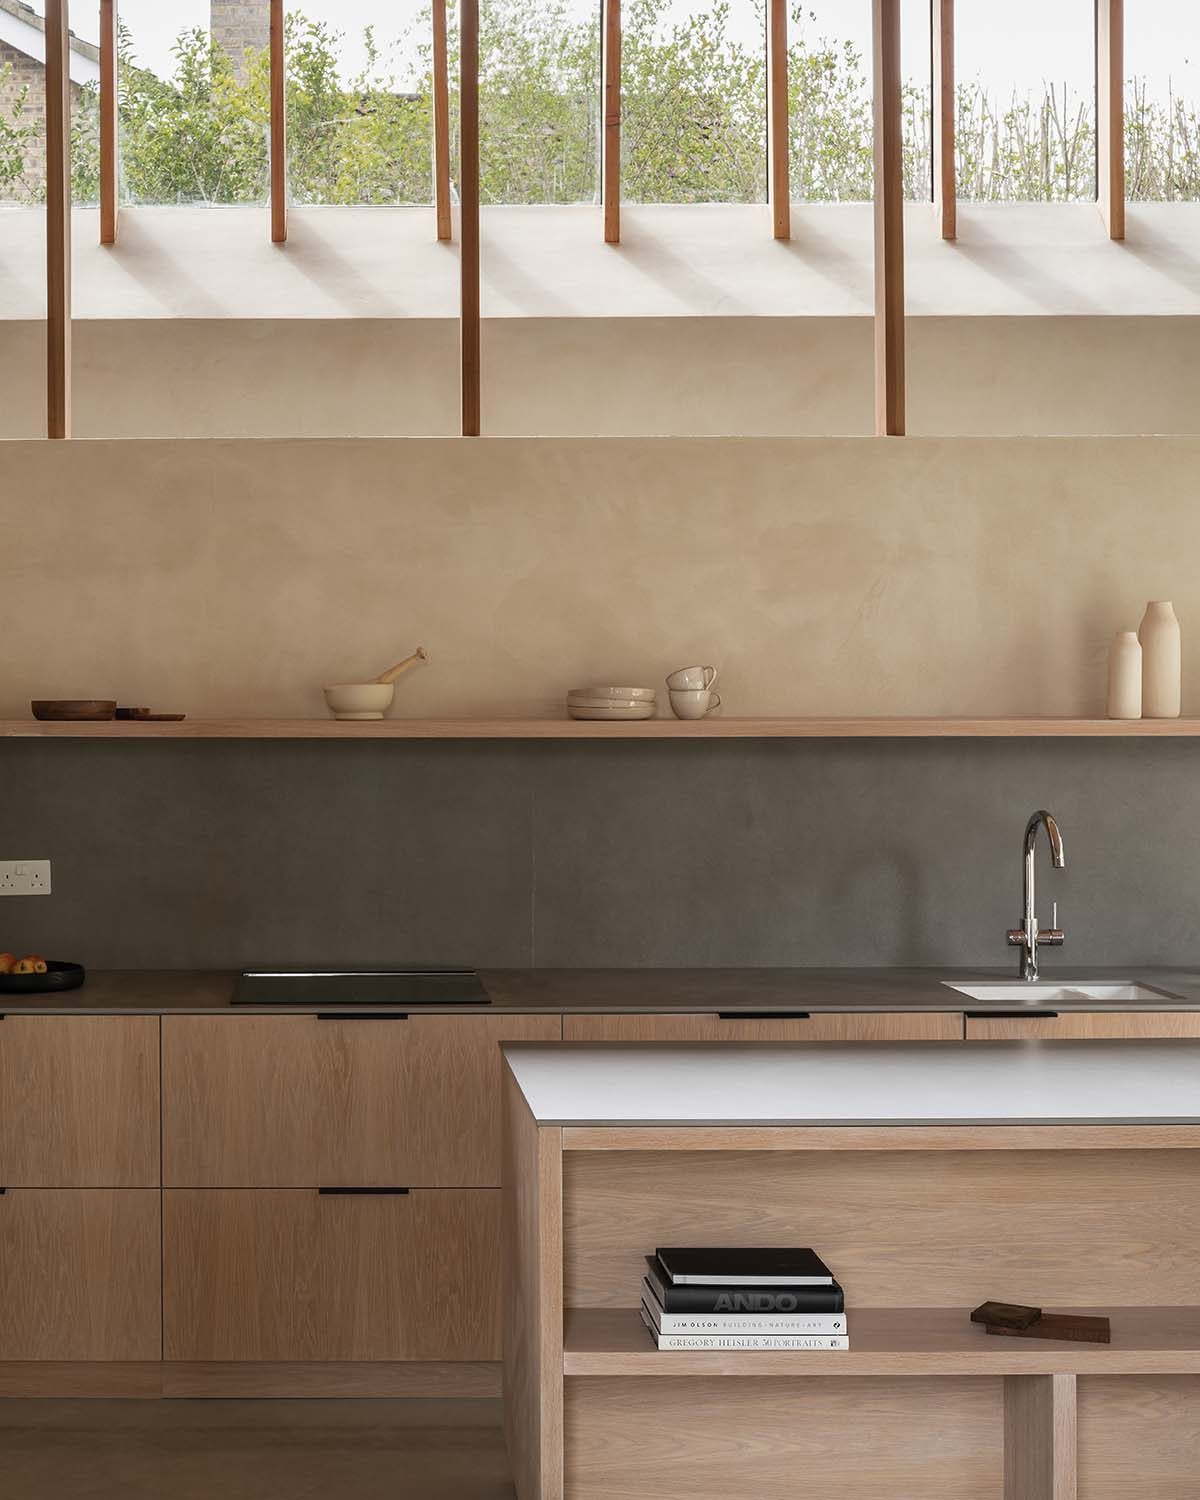 An accessible home kitchen by architect Oliver Leech